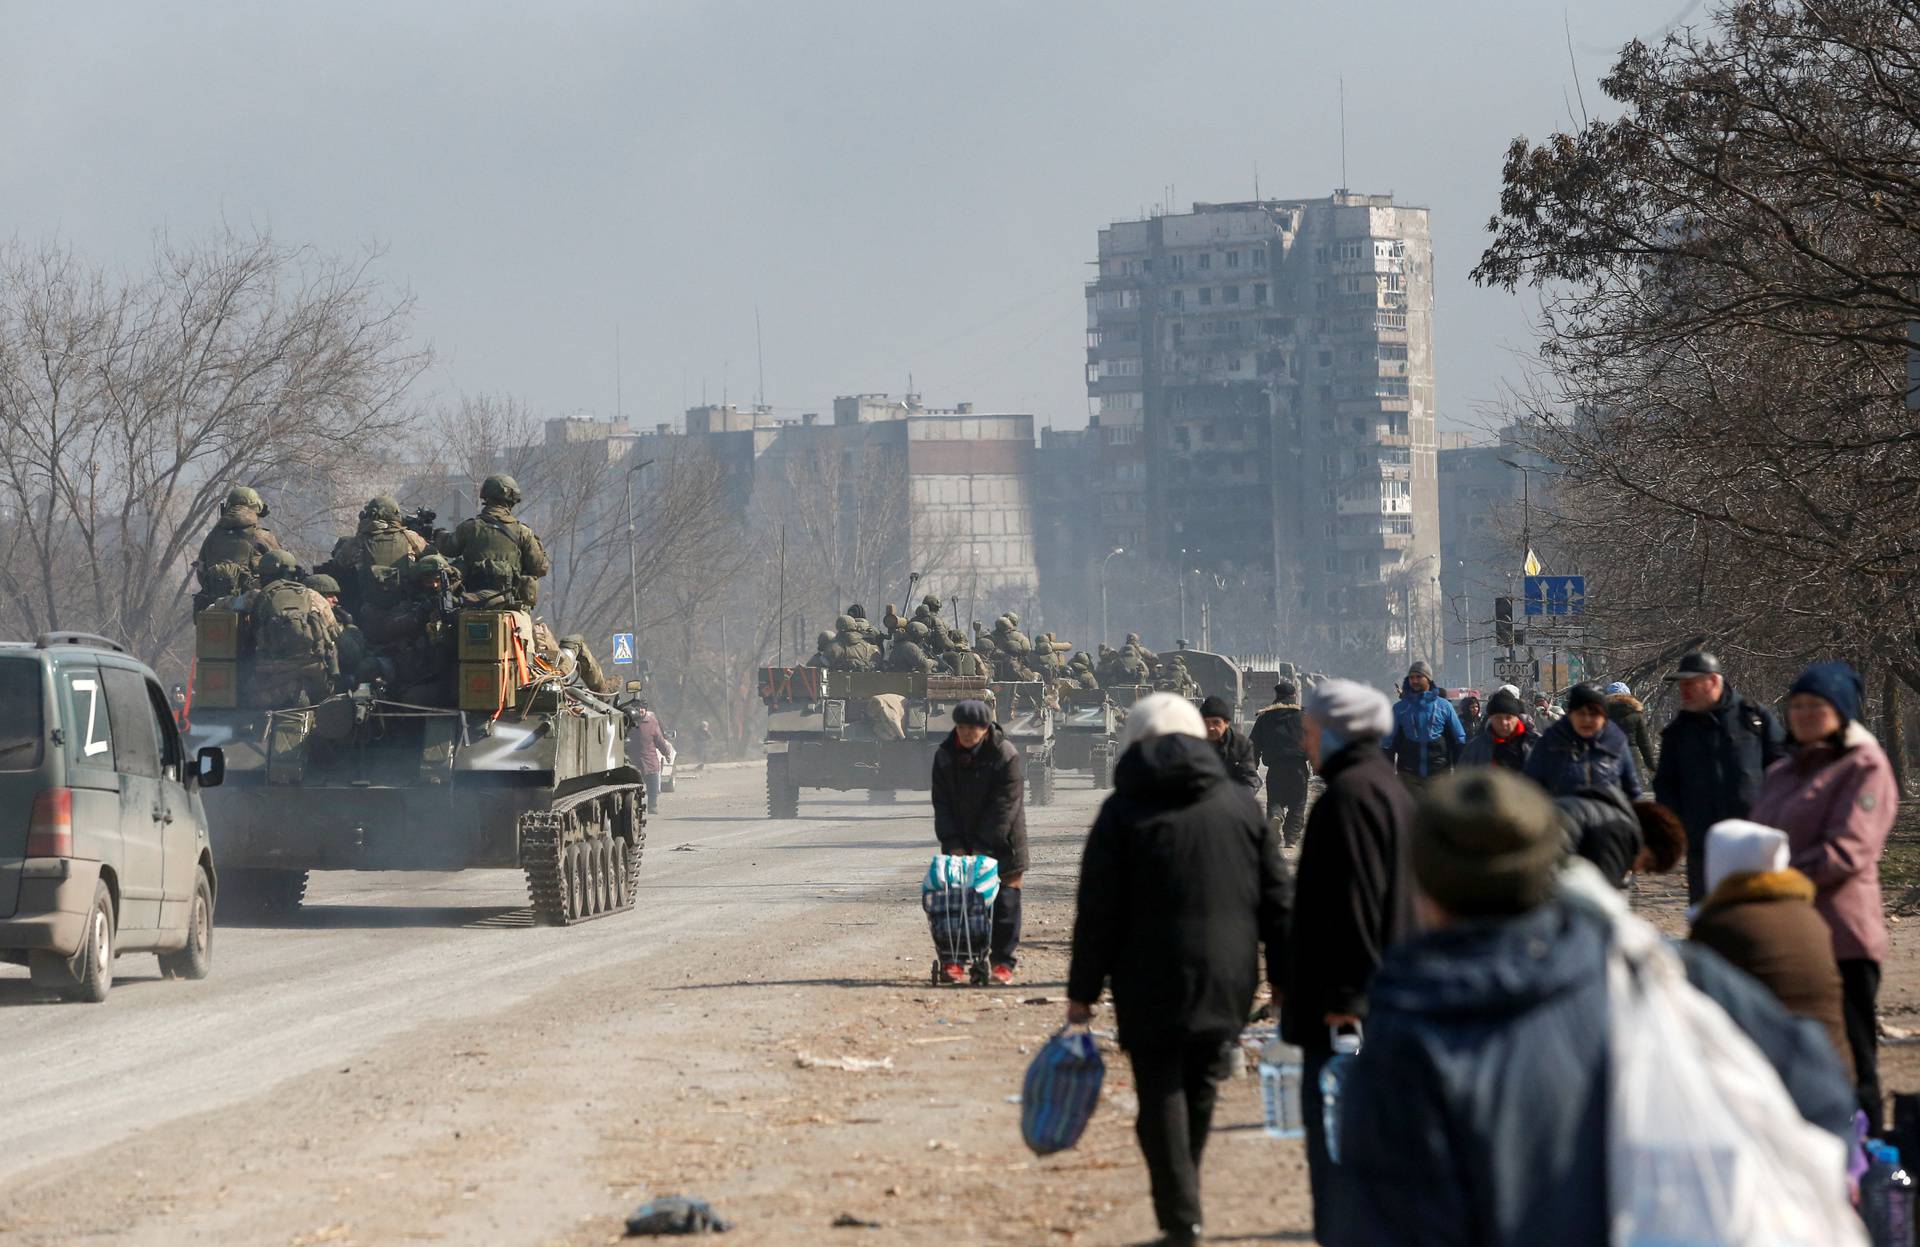 Service members of pro-Russian troops are seen atop of armoured vehicles in the besieged city of Mariupol